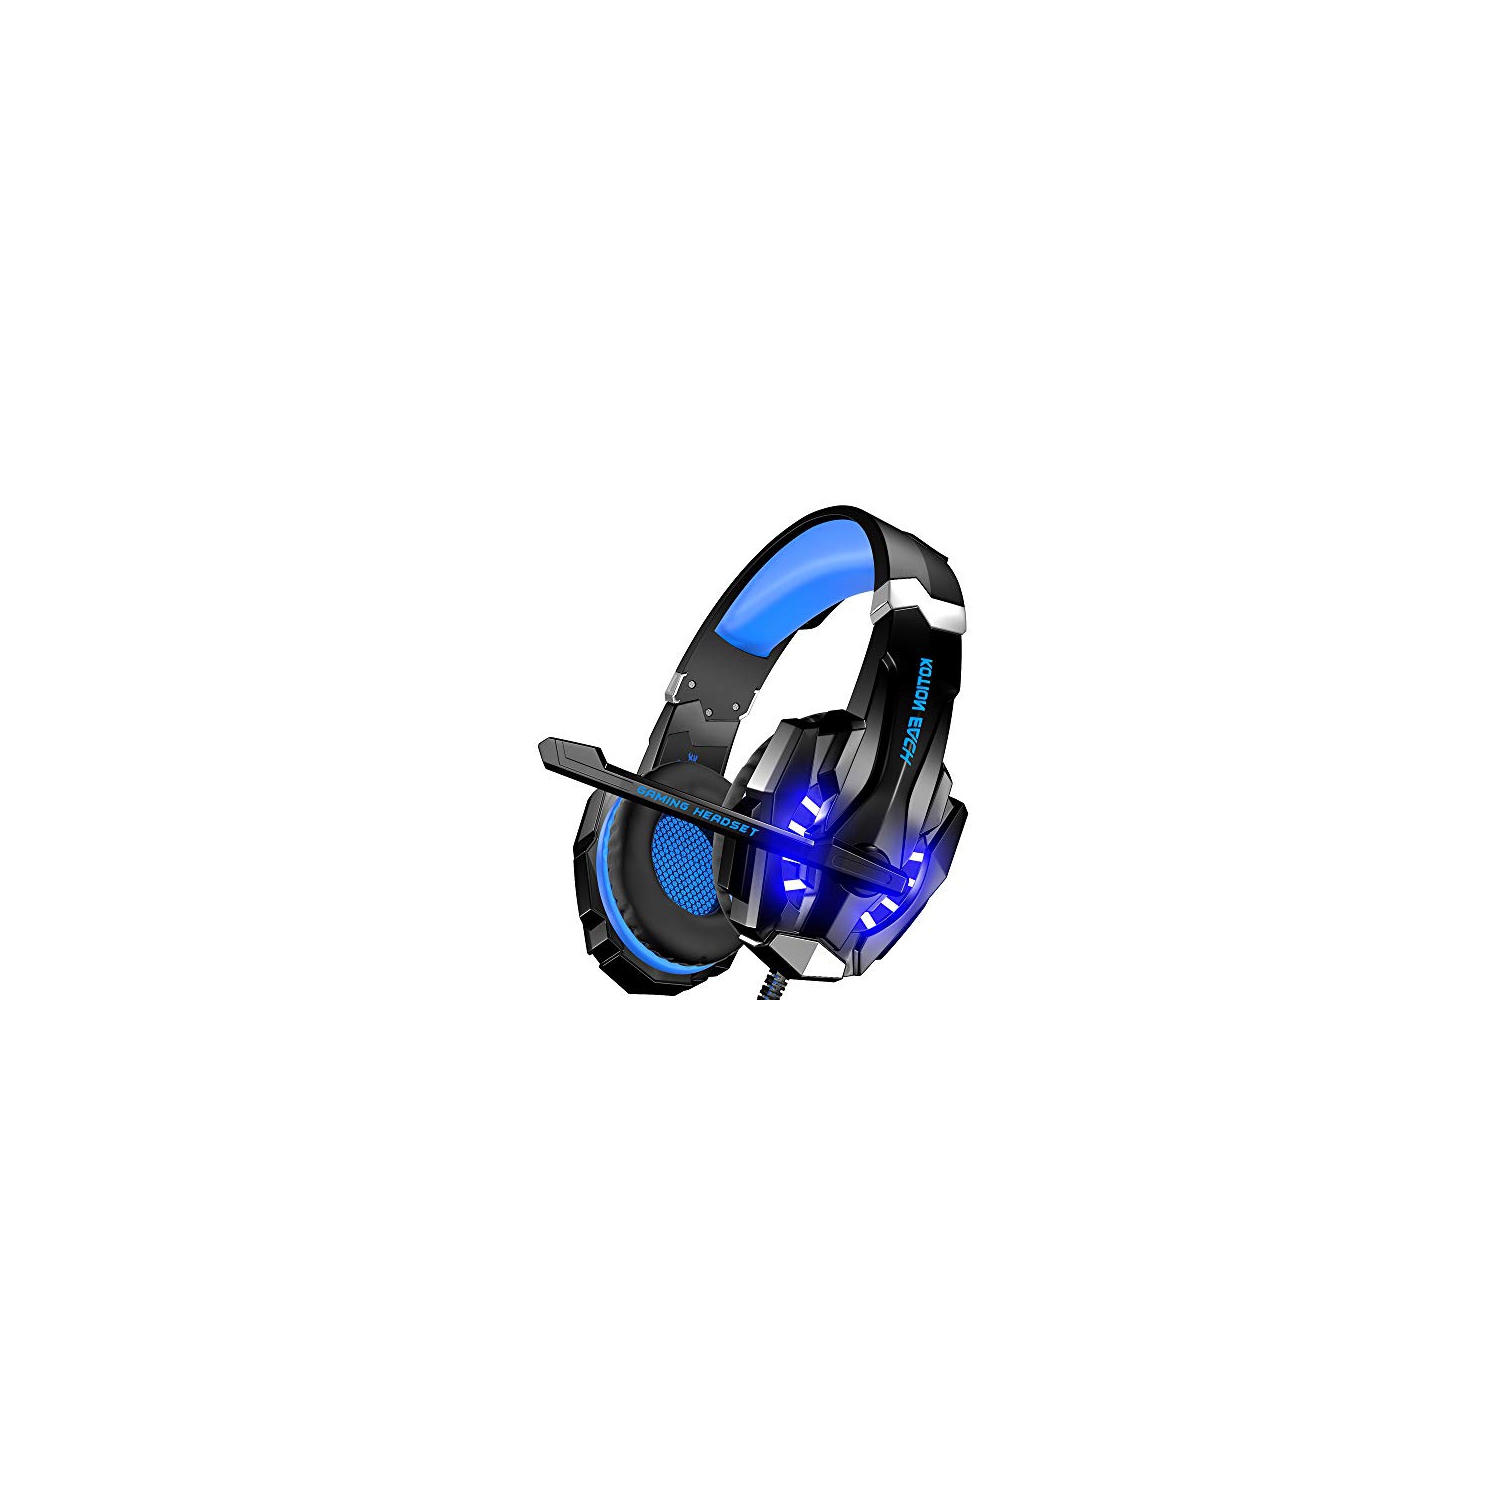 BENGOO G9000 Gaming Headset Over Ear Headphone with Mic and LED Light for PC, PS4, Xbox One, Switch, Tablet